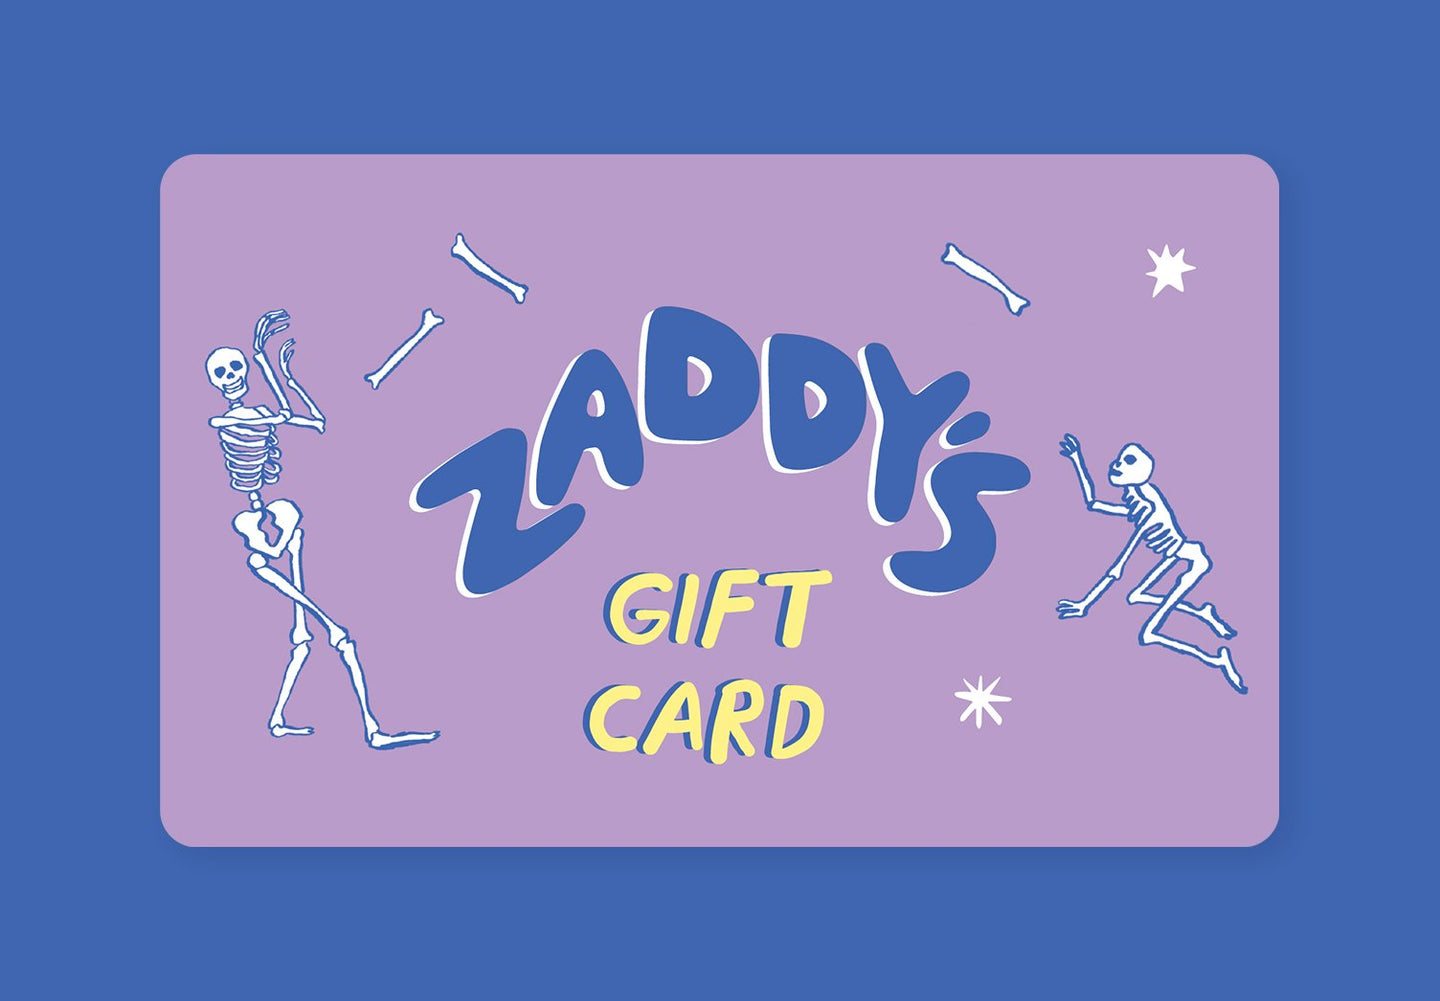 Zaddy's Gift Card (for merch only)